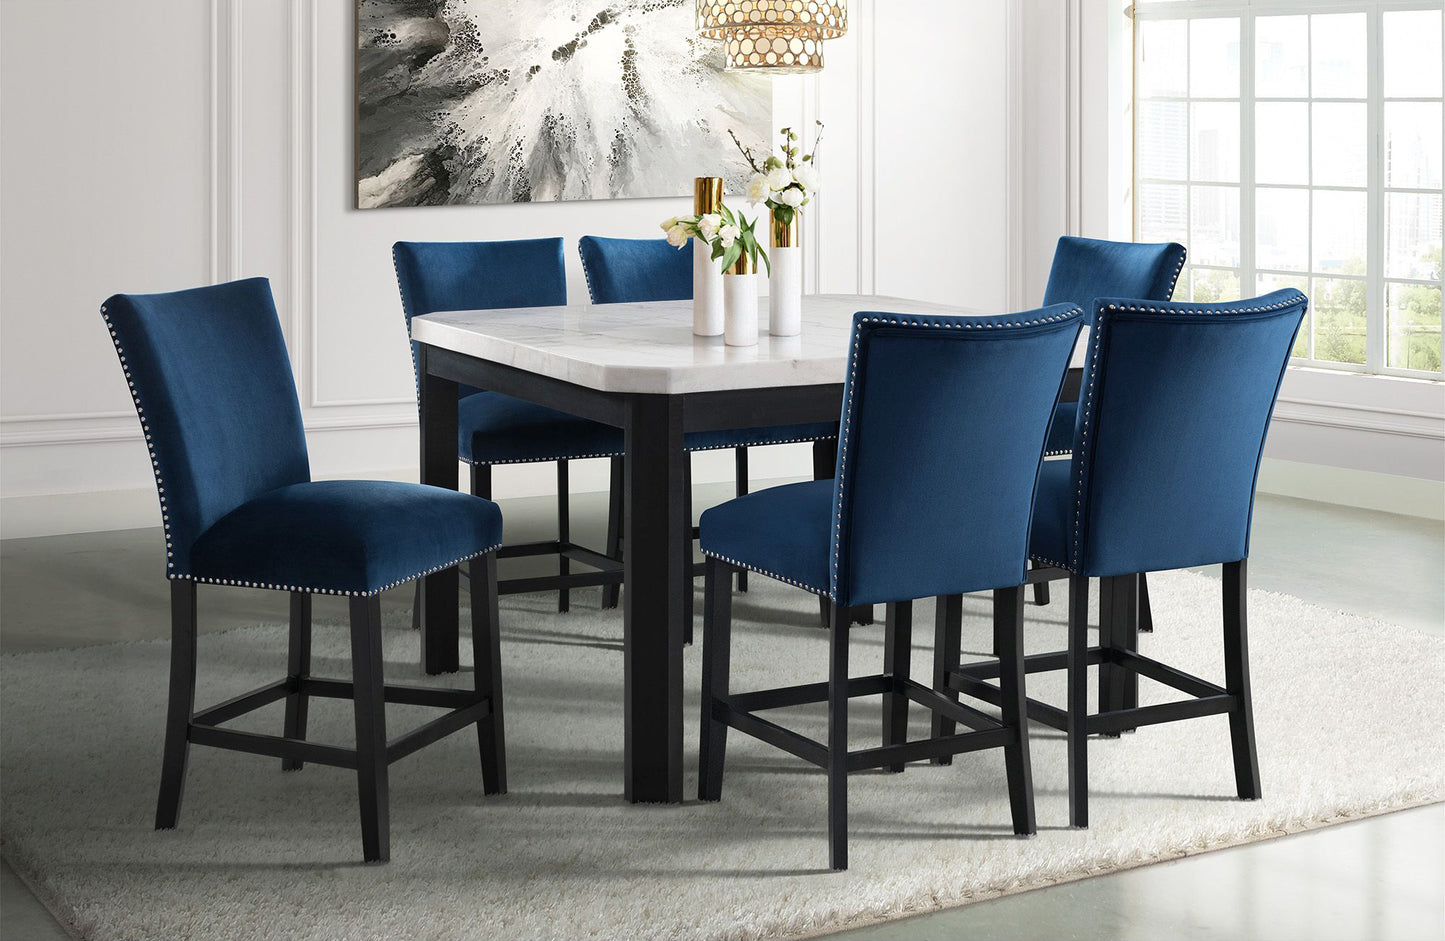 Francesca 5 Piece Counter Height Set with Blue Stools